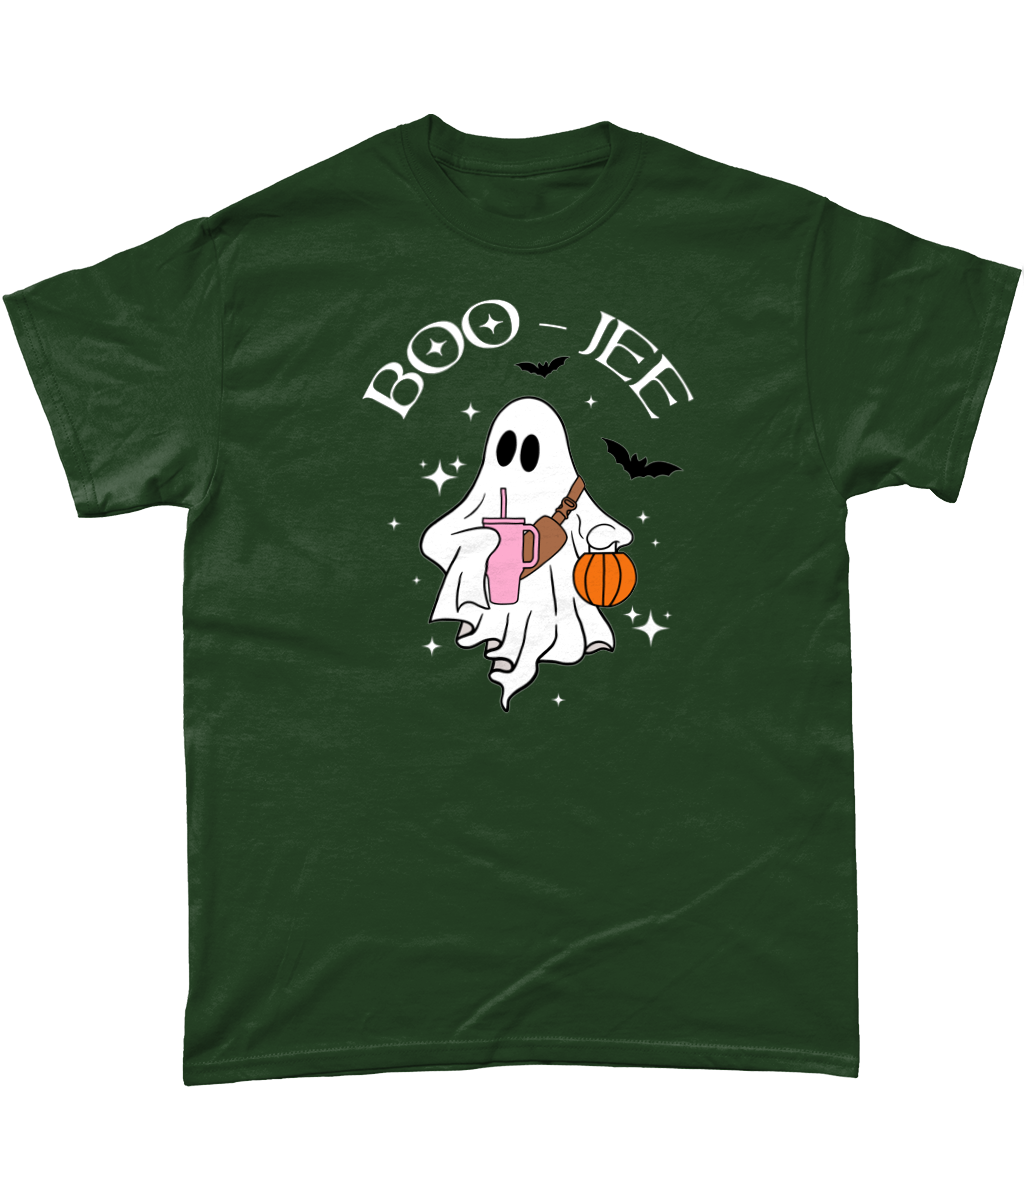 BOO-JEE Unisex Fit T-Shirt